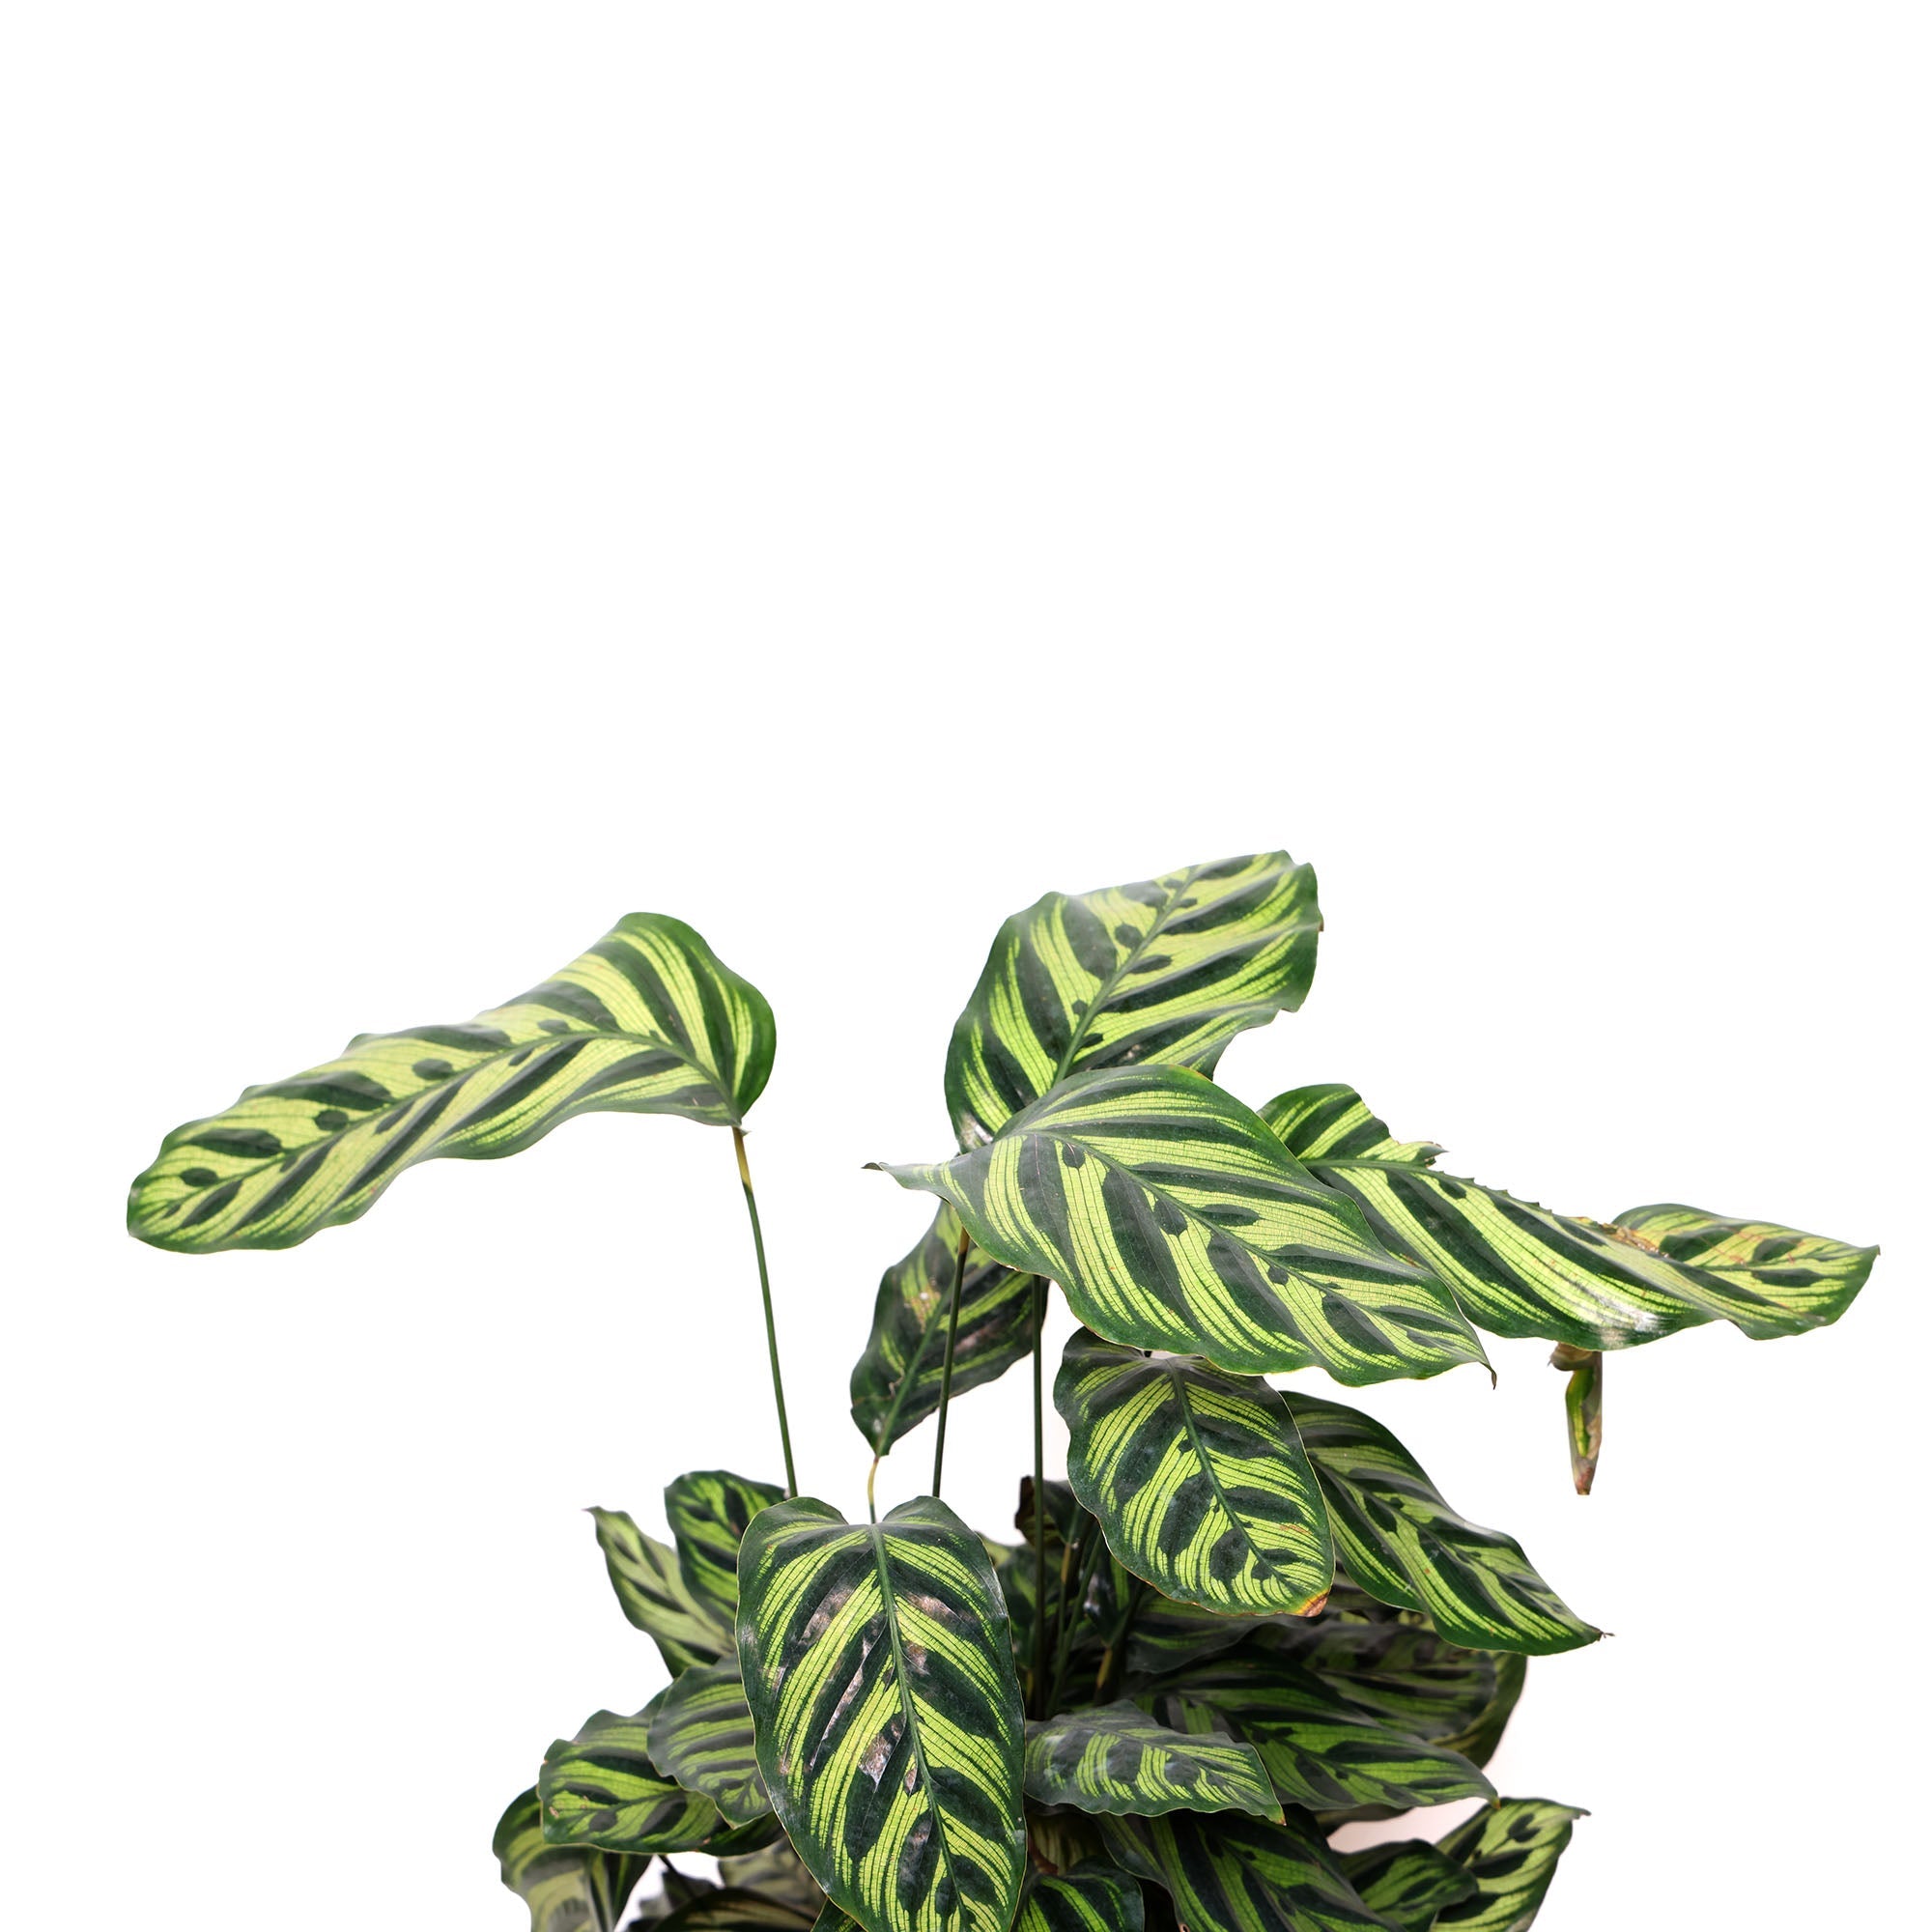 A potted Calathea Makoyana 10 Inches (rattlesnake plant) with vibrant, patterned leaves in green and dark green, isolated on a white background by Chive Studio.